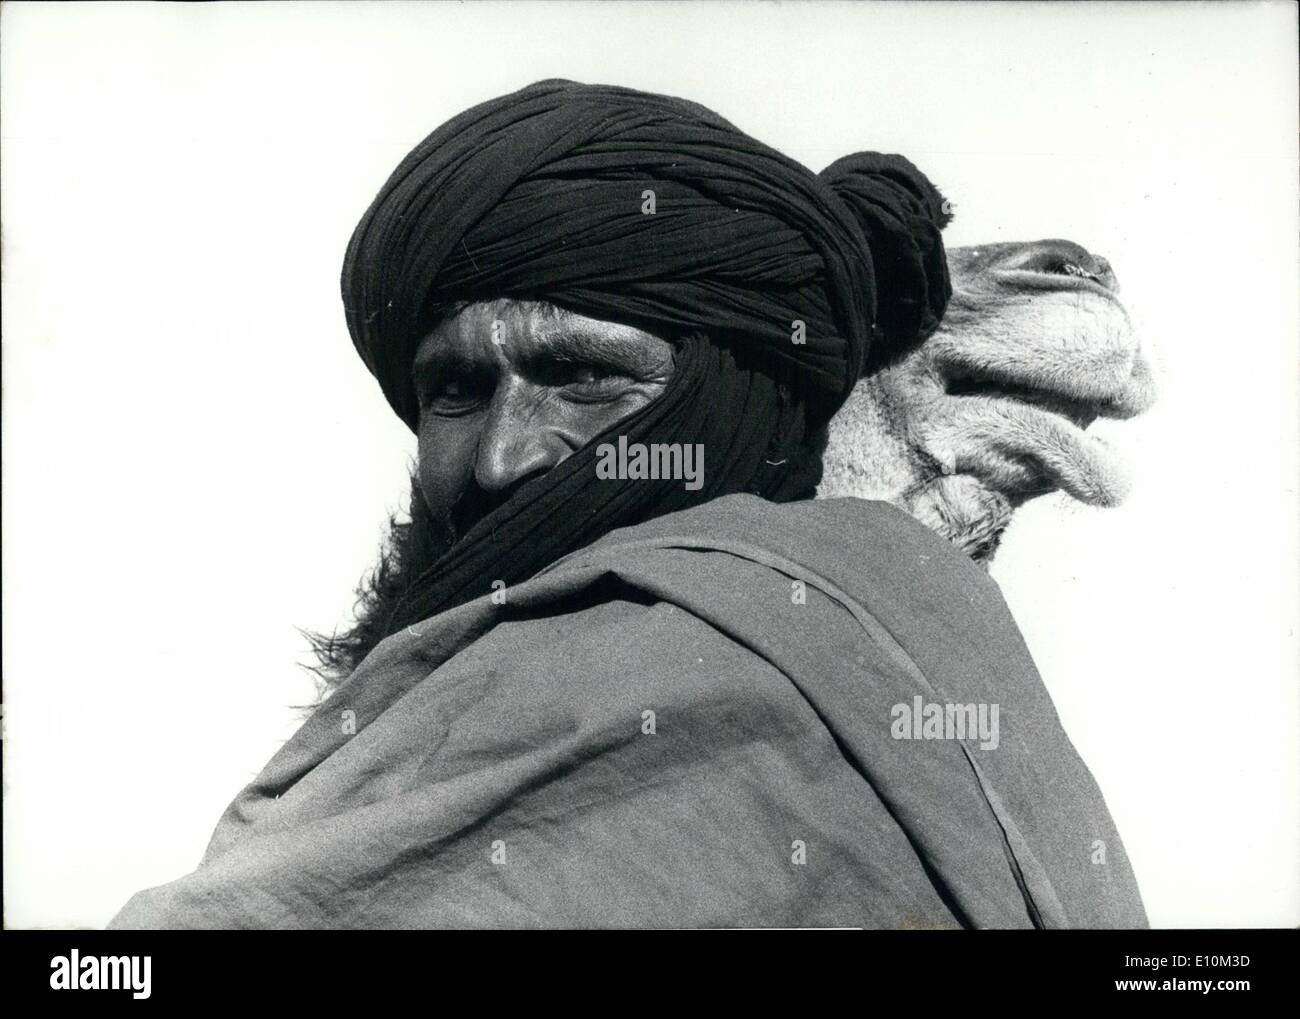 Jun. 06, 1973 - The Poor of The World, as this herdsman from Afghnistan, who agreed to be photographed with one of his camels,. Stock Photo